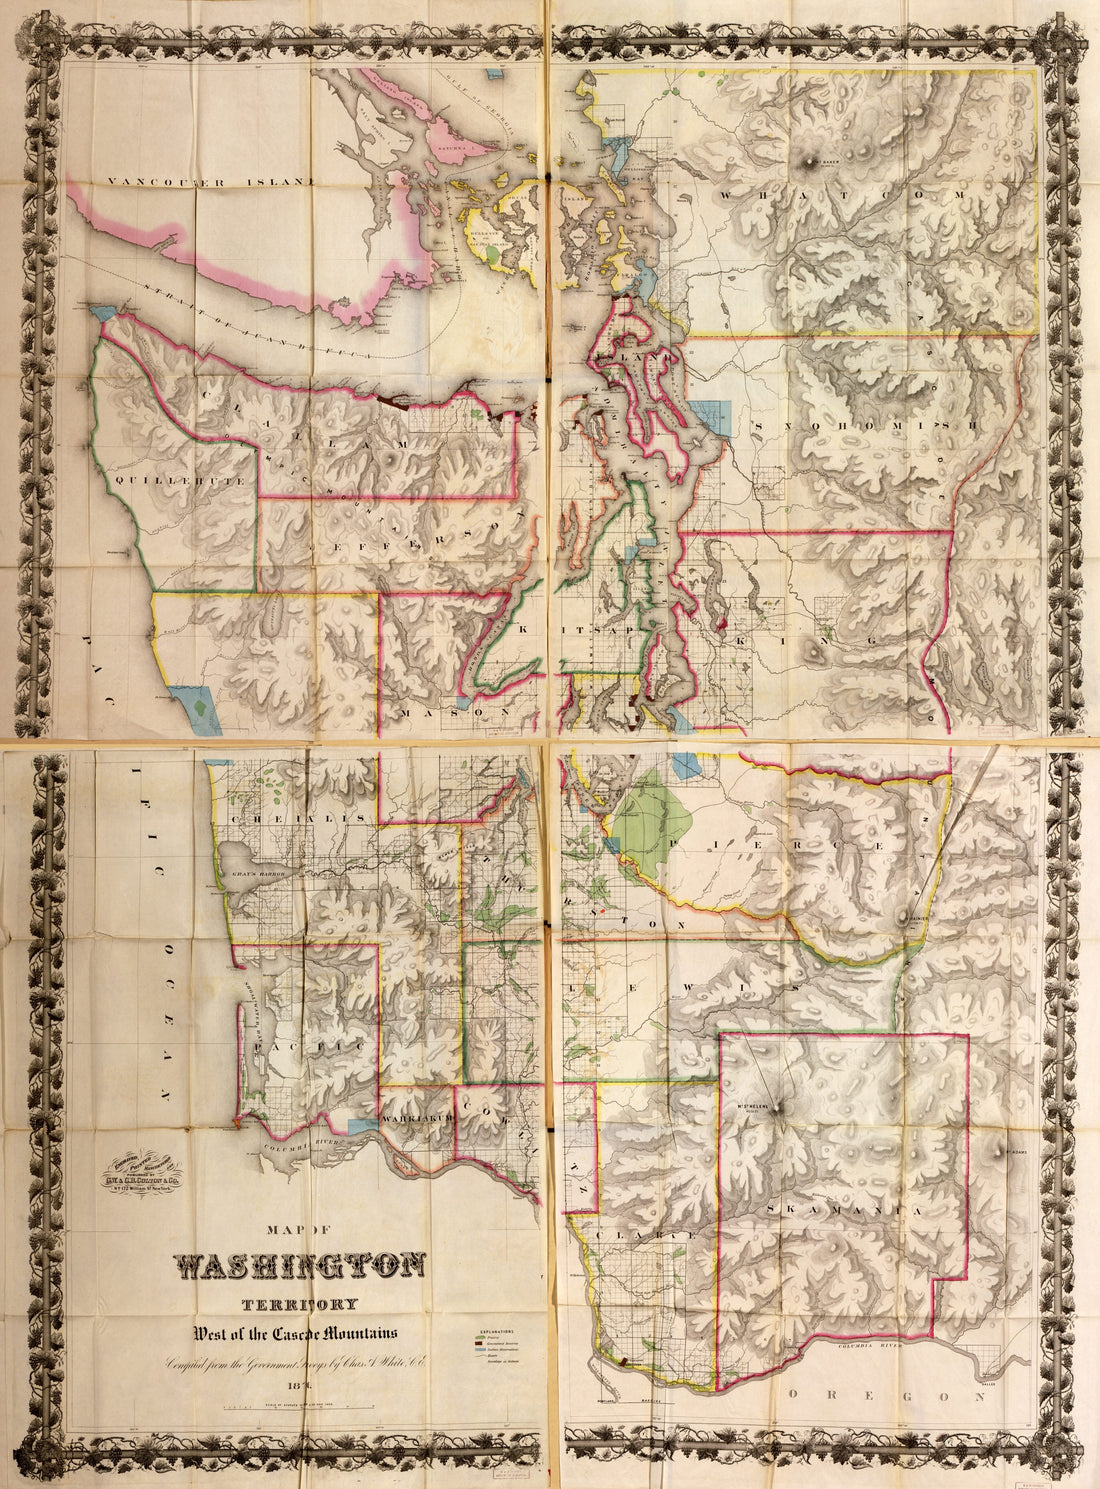 This old map of Map of Washington Territory : West of the Cascade Mountains (Washington Territory) from 1870 was created by  G.W. &amp; C.B. Colton &amp; Co, Charles A. White, Charles A. (Charles Abiathar) White in 1870